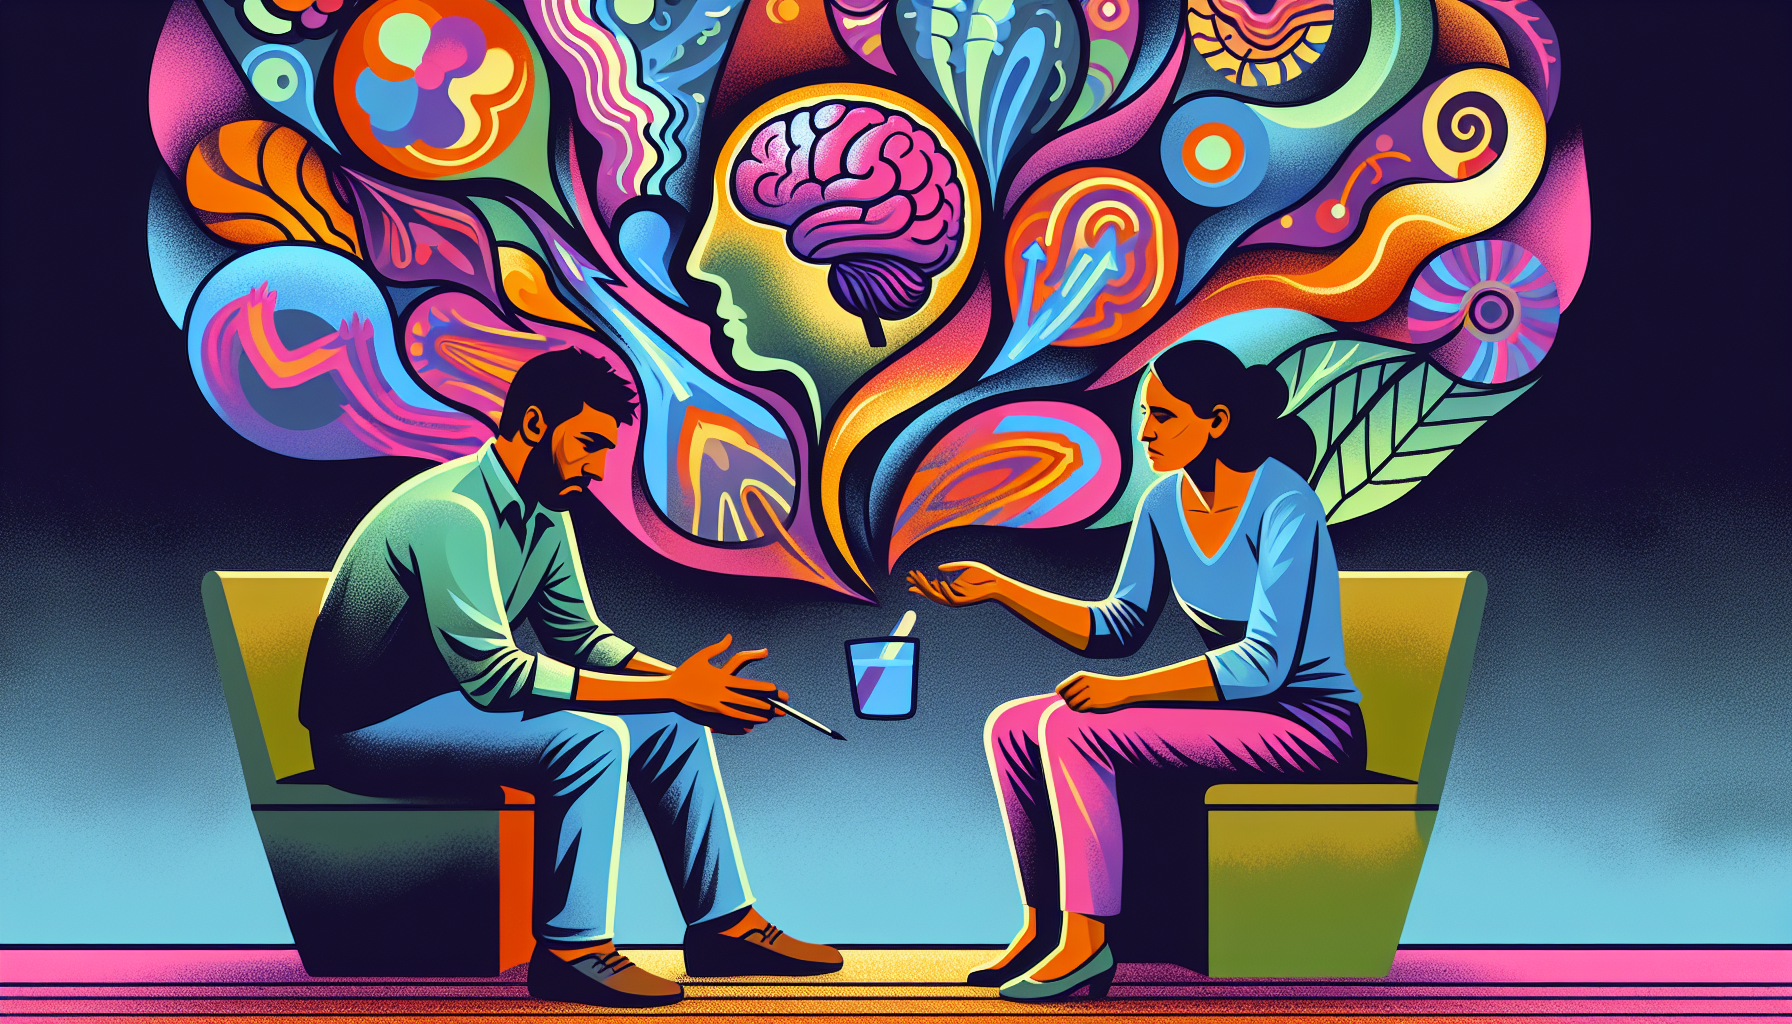 mental illness can co occur with drug addiction requiring comprehensive treatment programs that address addictive disorders and mental health disorders